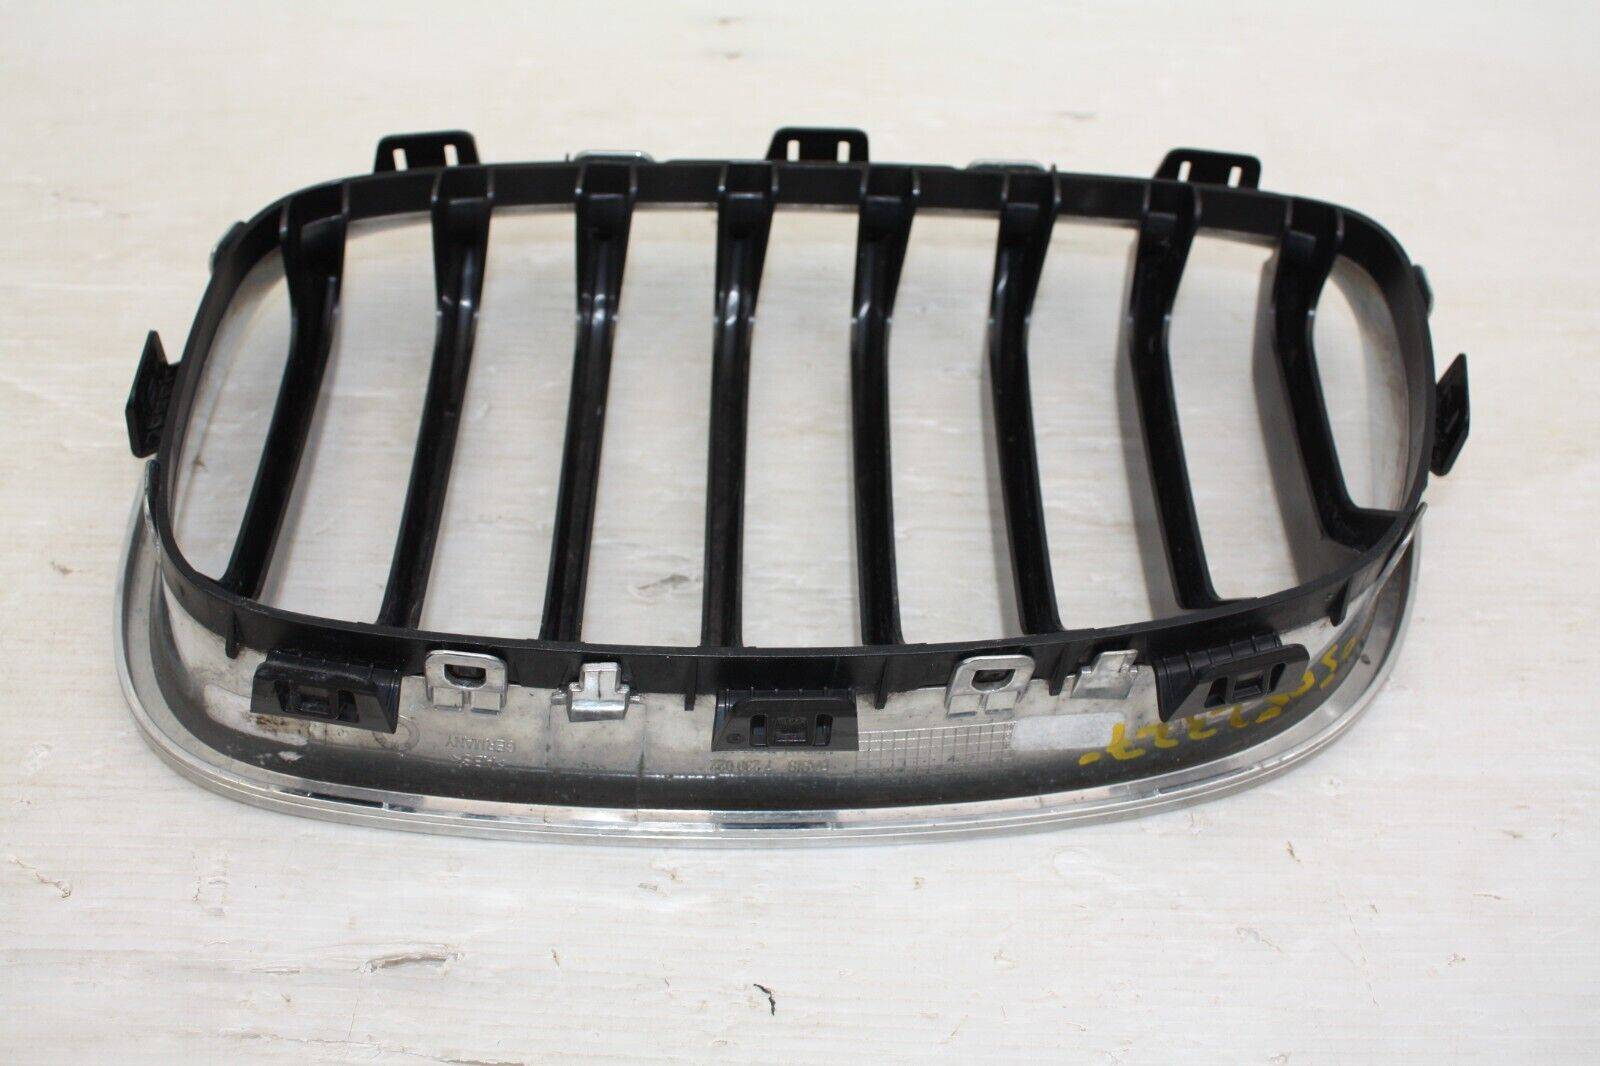 BMW-1-Series-F20-Front-Bumper-Right-Kidney-Grill-2012-TO-2015-7239022-Genuine-175714674853-7